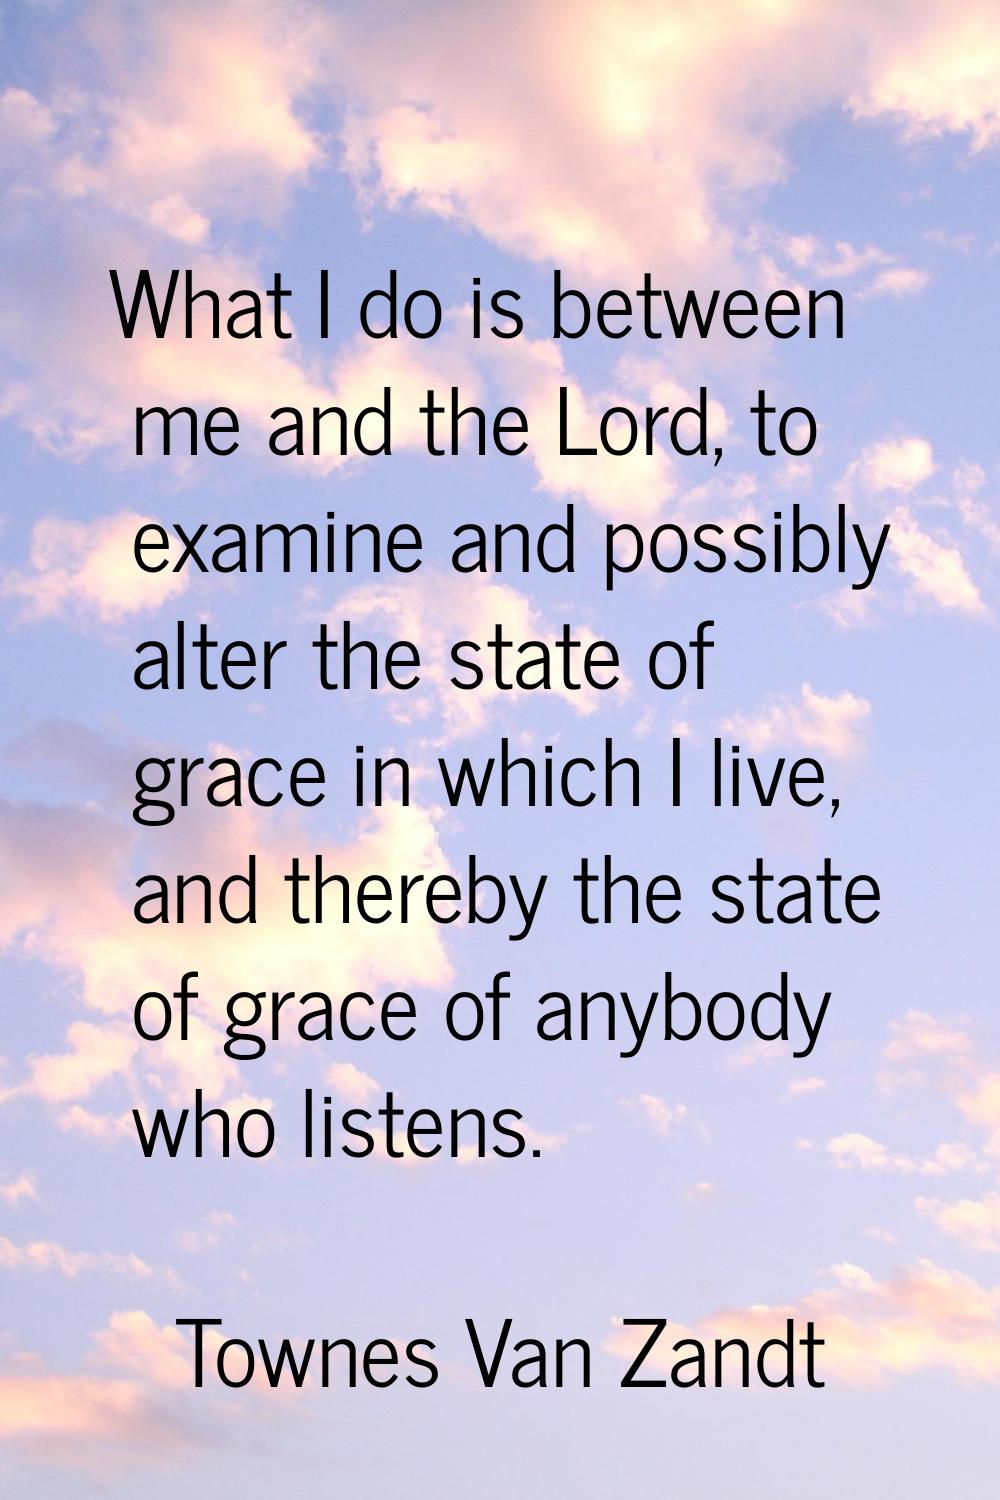 What I do is between me and the Lord, to examine and possibly alter the state of grace in which I l